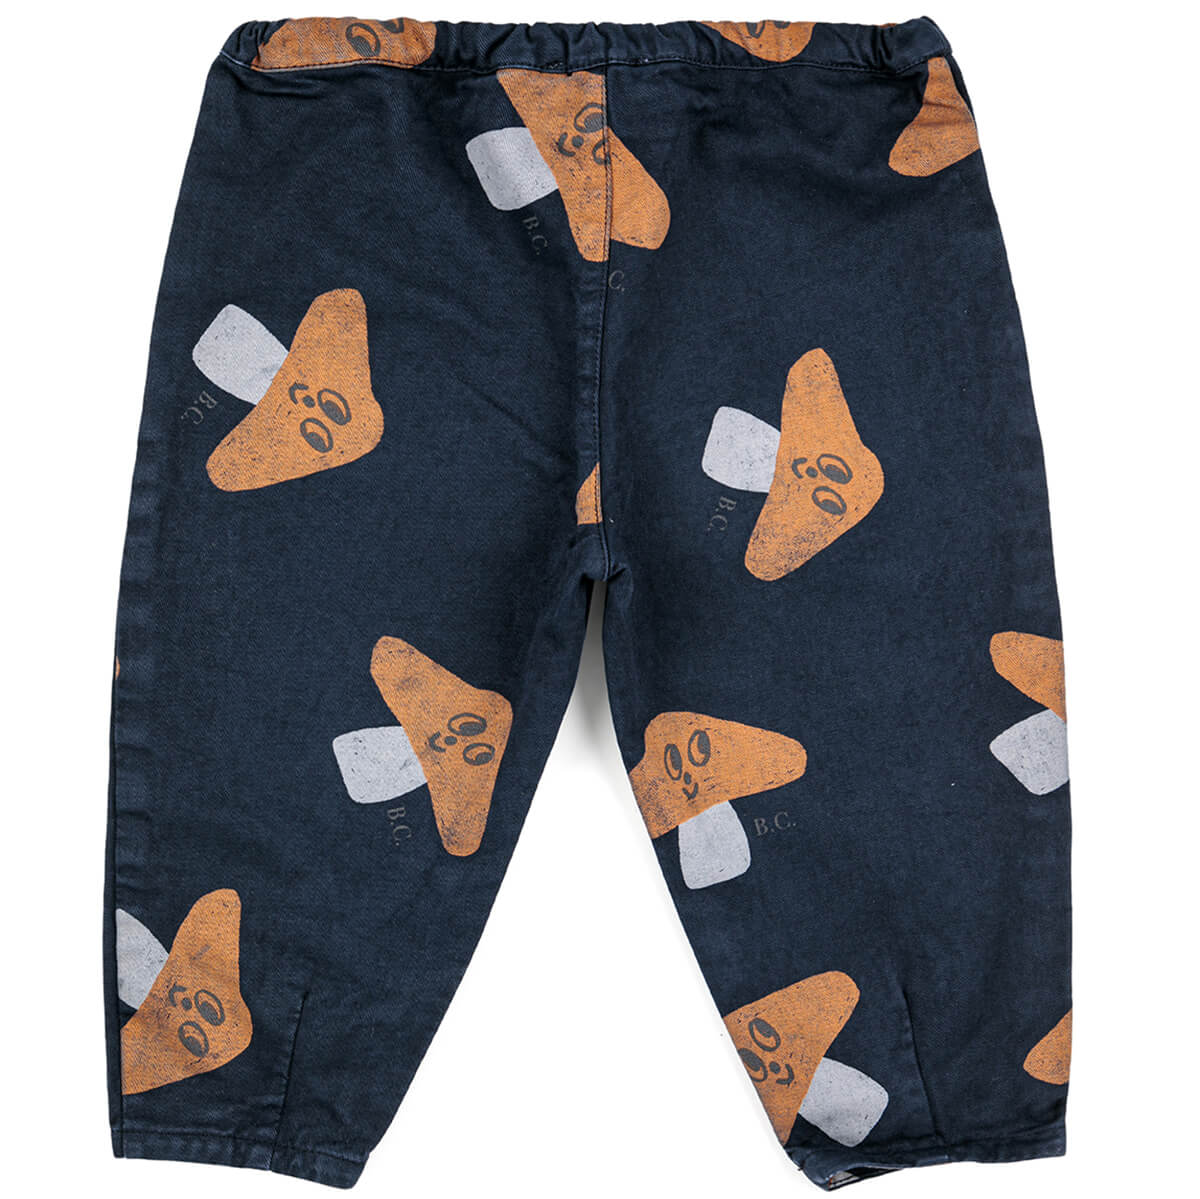 Mr Mushroom All Over Baby Woven Pants by Bobo Choses – Junior Edition